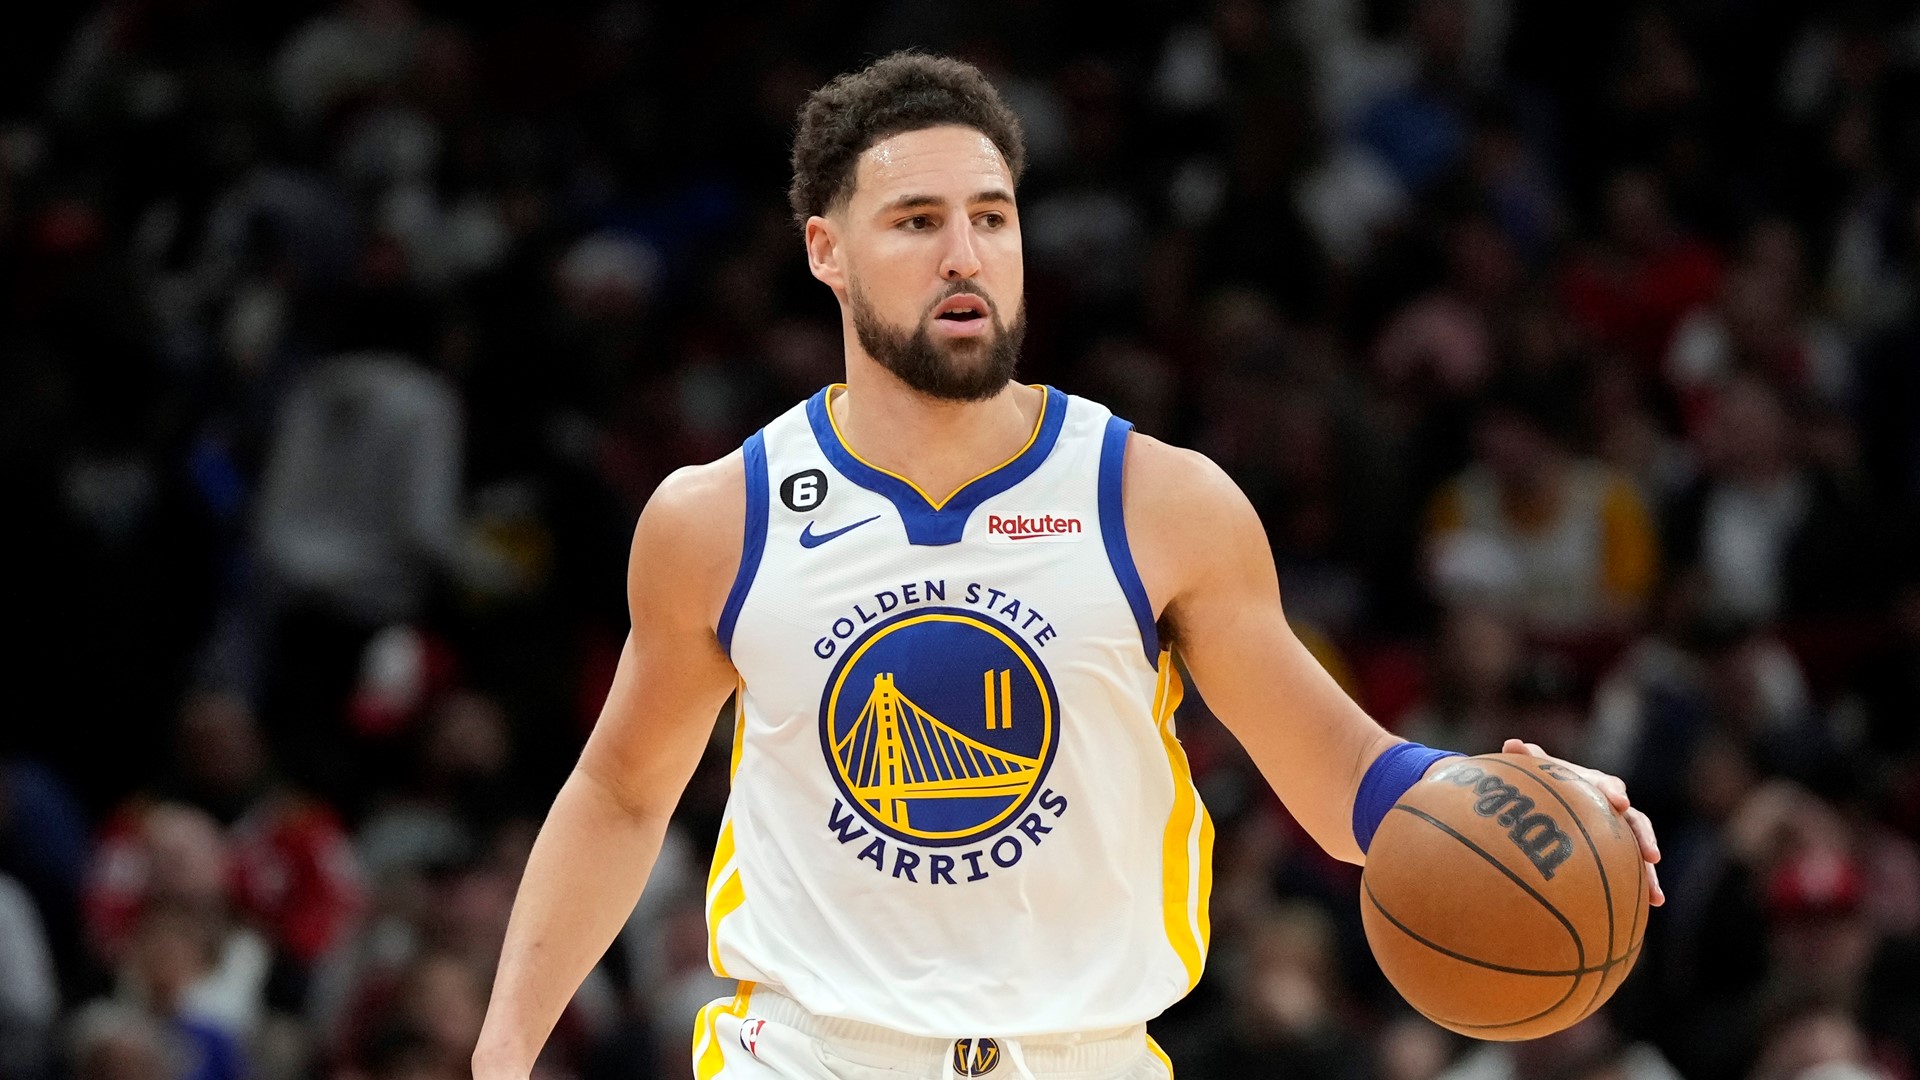 WFAA's Mike Leslie breaks down what Klay Thompson will bring the Dallas Mavericks.